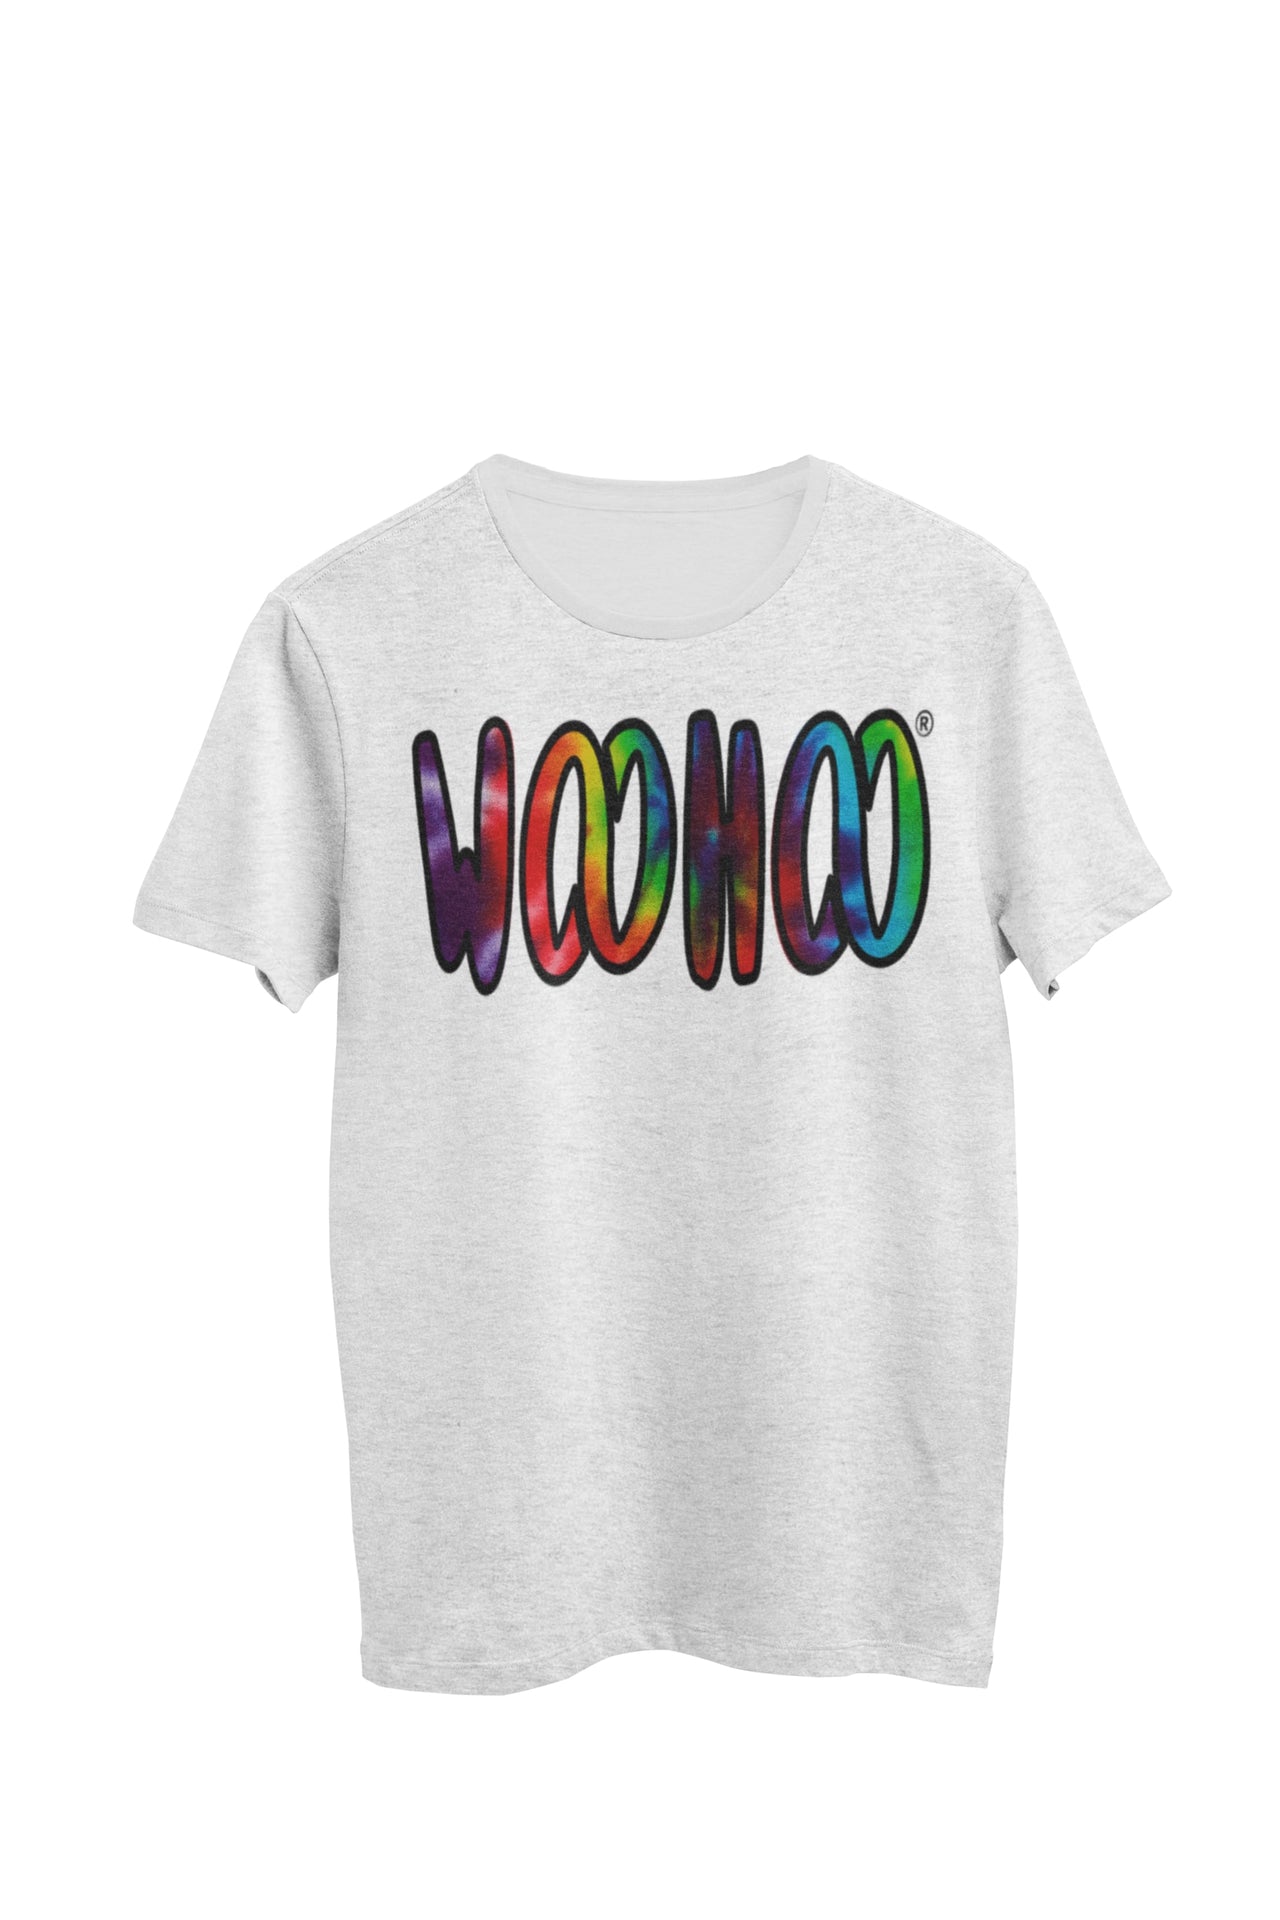 Heather gray unisex t-shirt by WooHoo Apparel.  The design features a larger 'woohoo' font with tie-dye inside the outline, called Prism